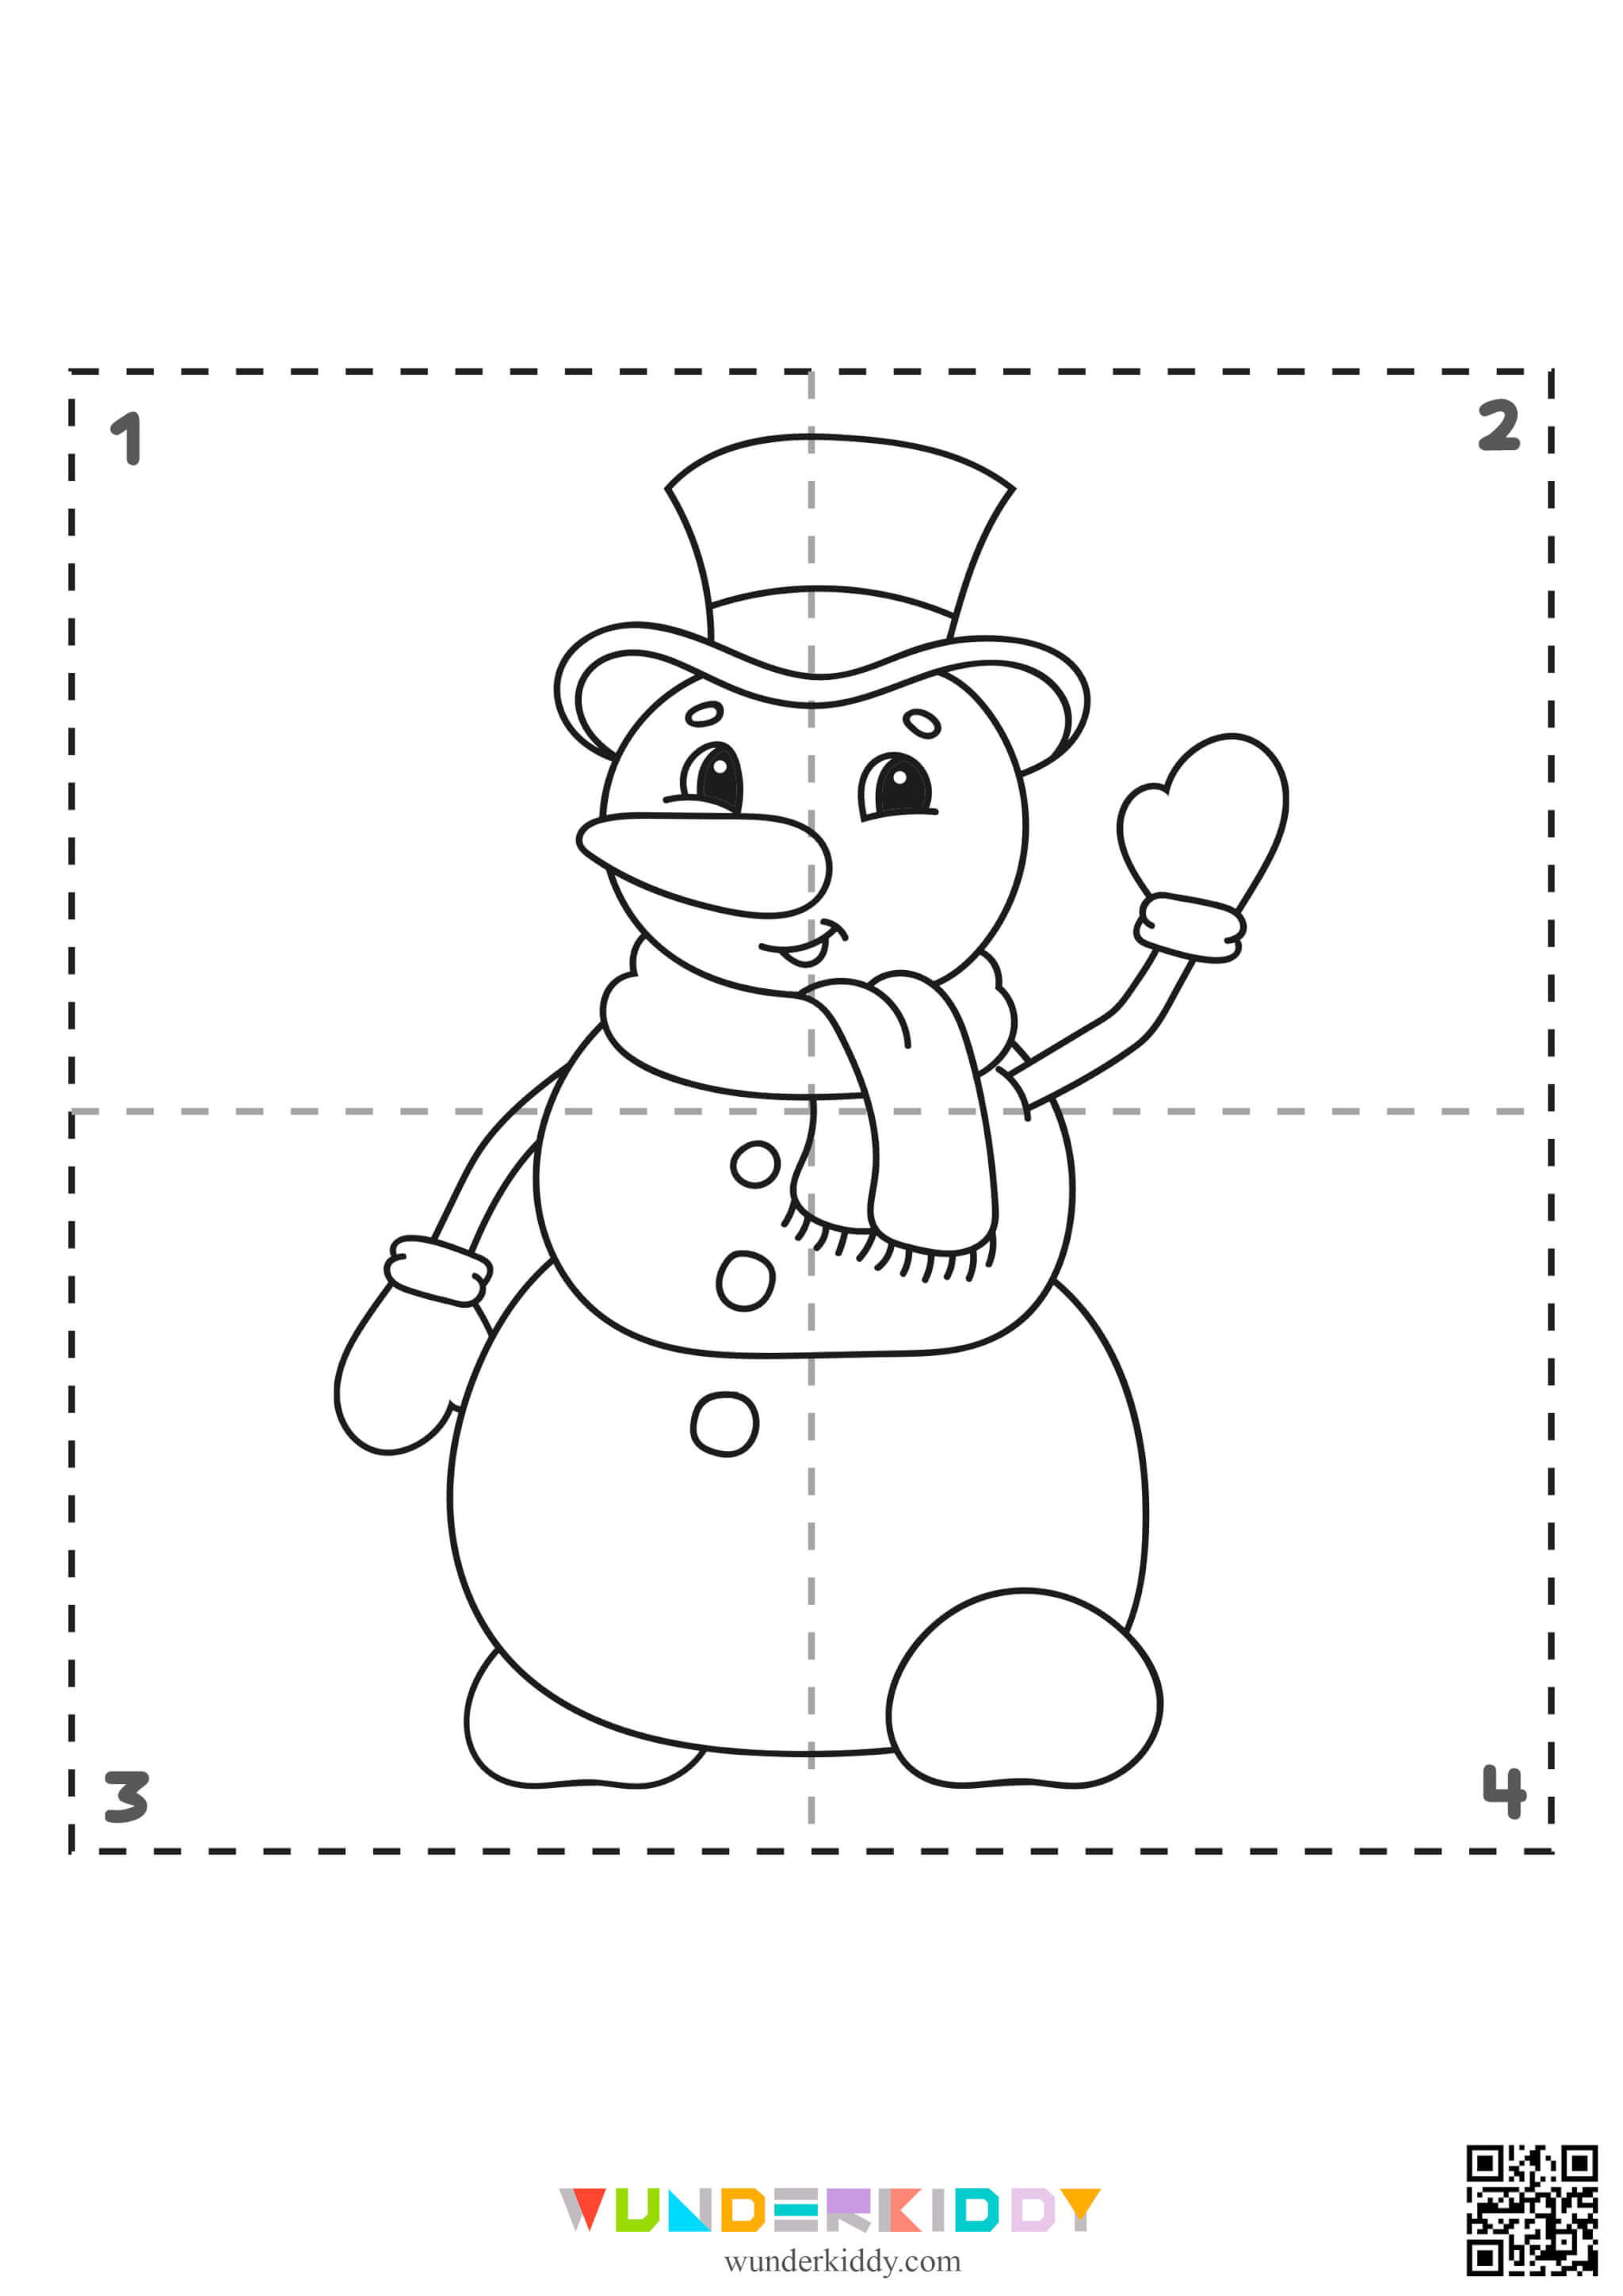 Coloring pages «New Year's Puzzle» - Image 3